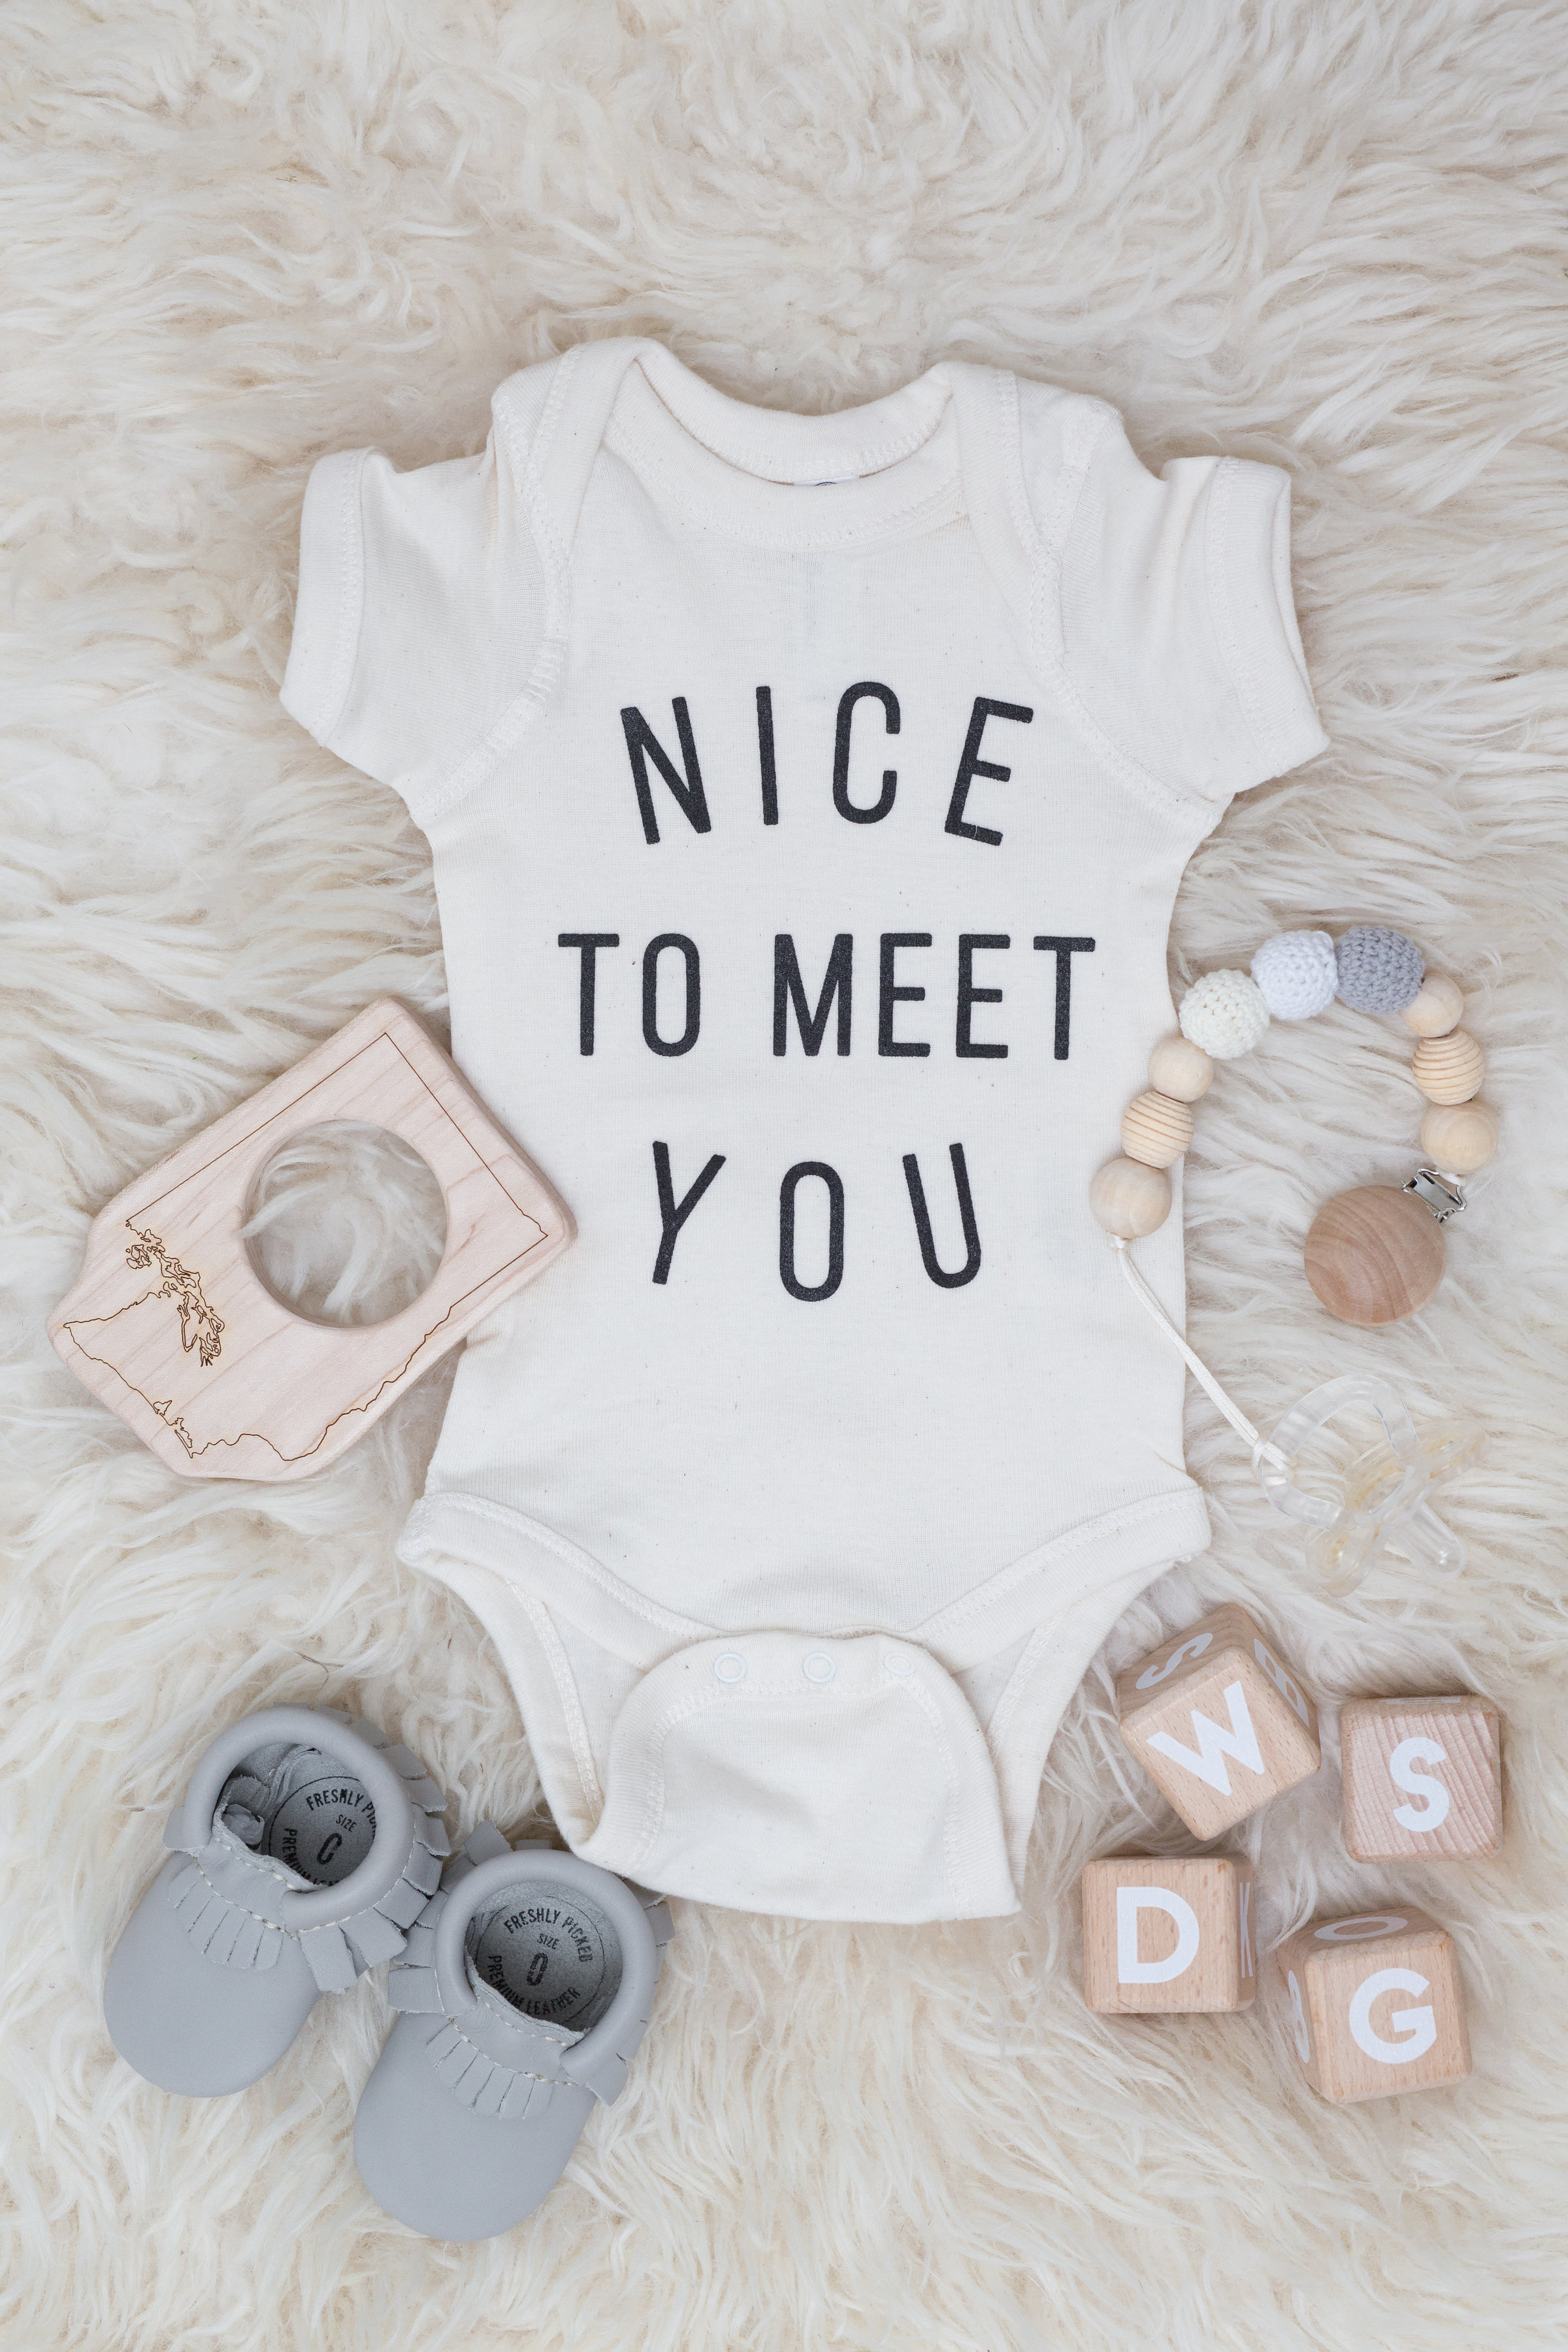 The cutest!!! &nbsp;I can't wait to get our tiny new soul into this onesie